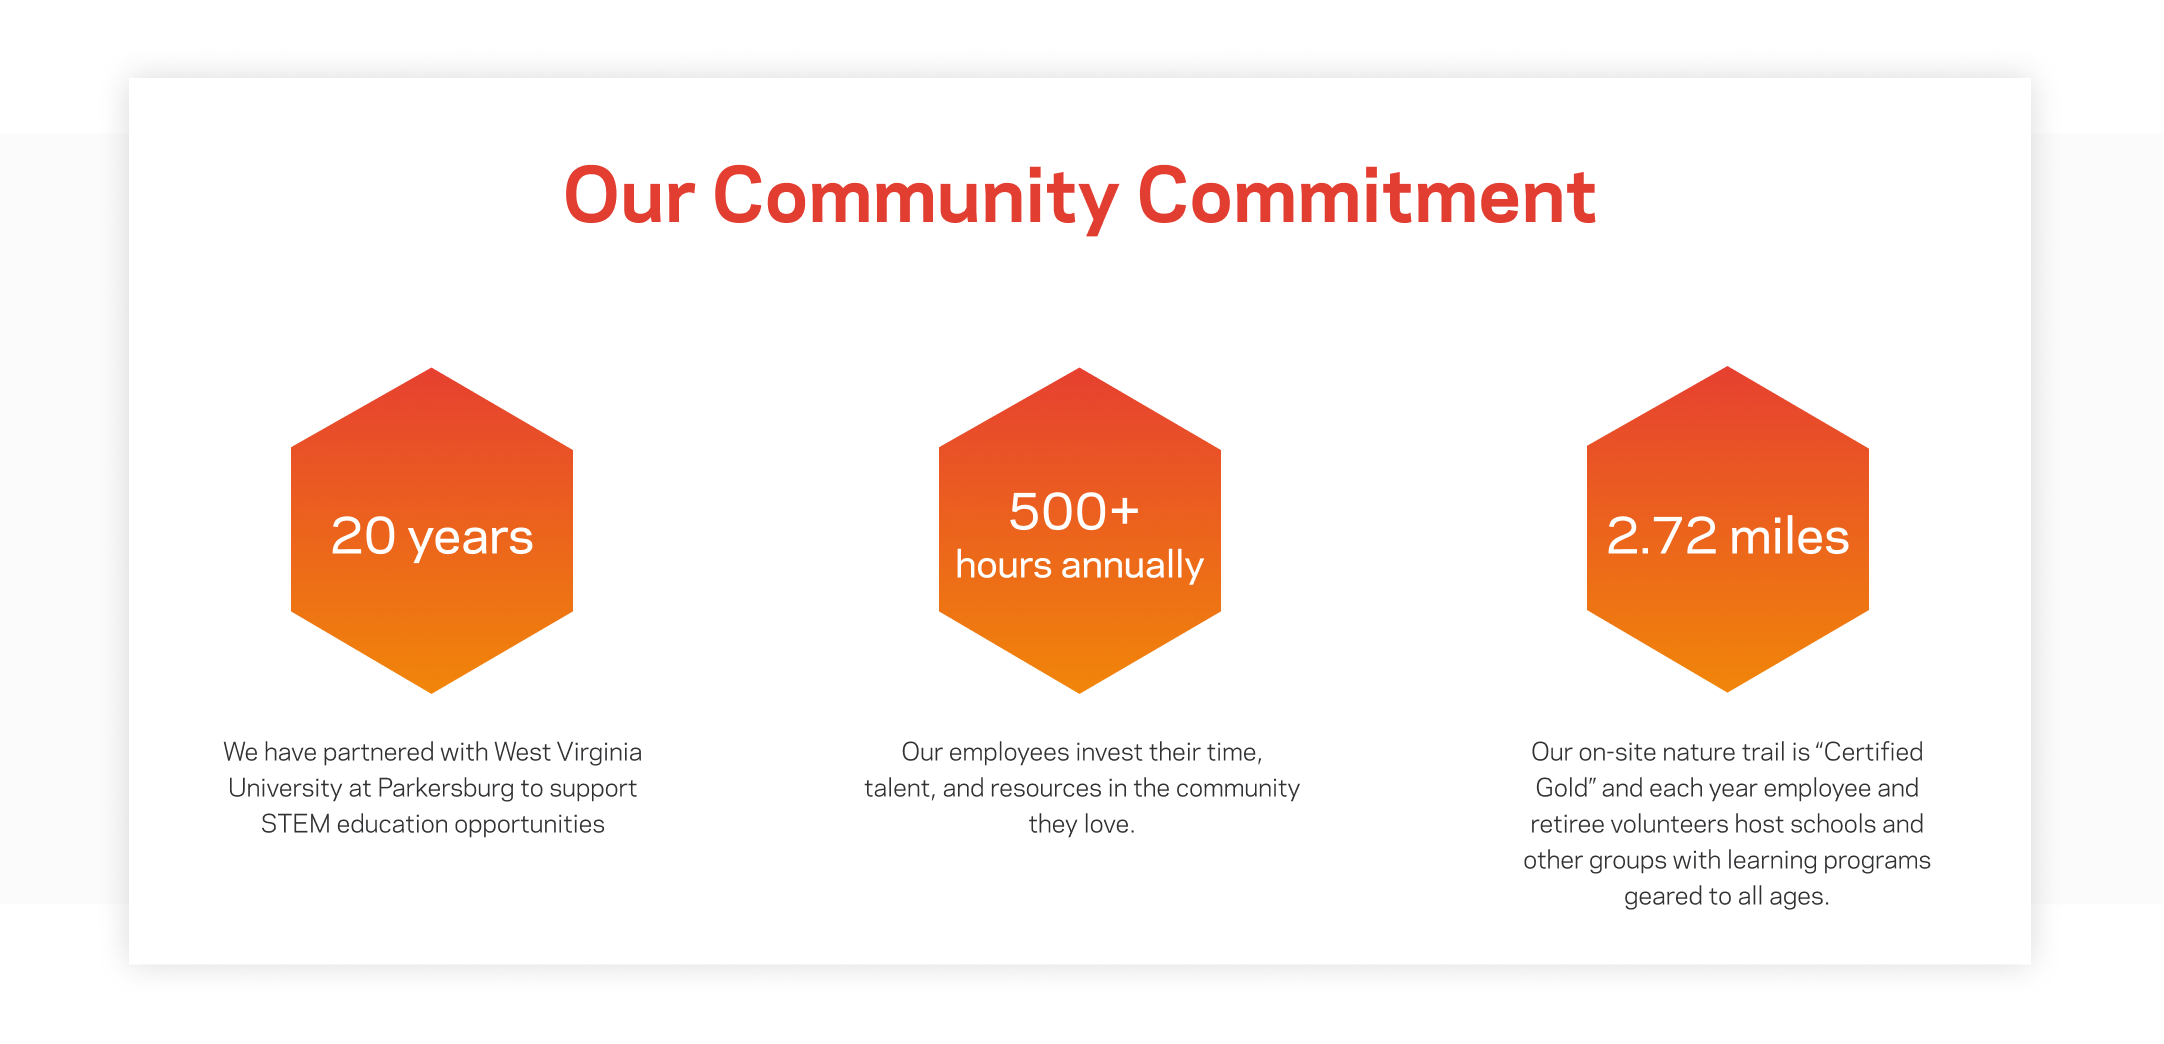 Our Community Commitment